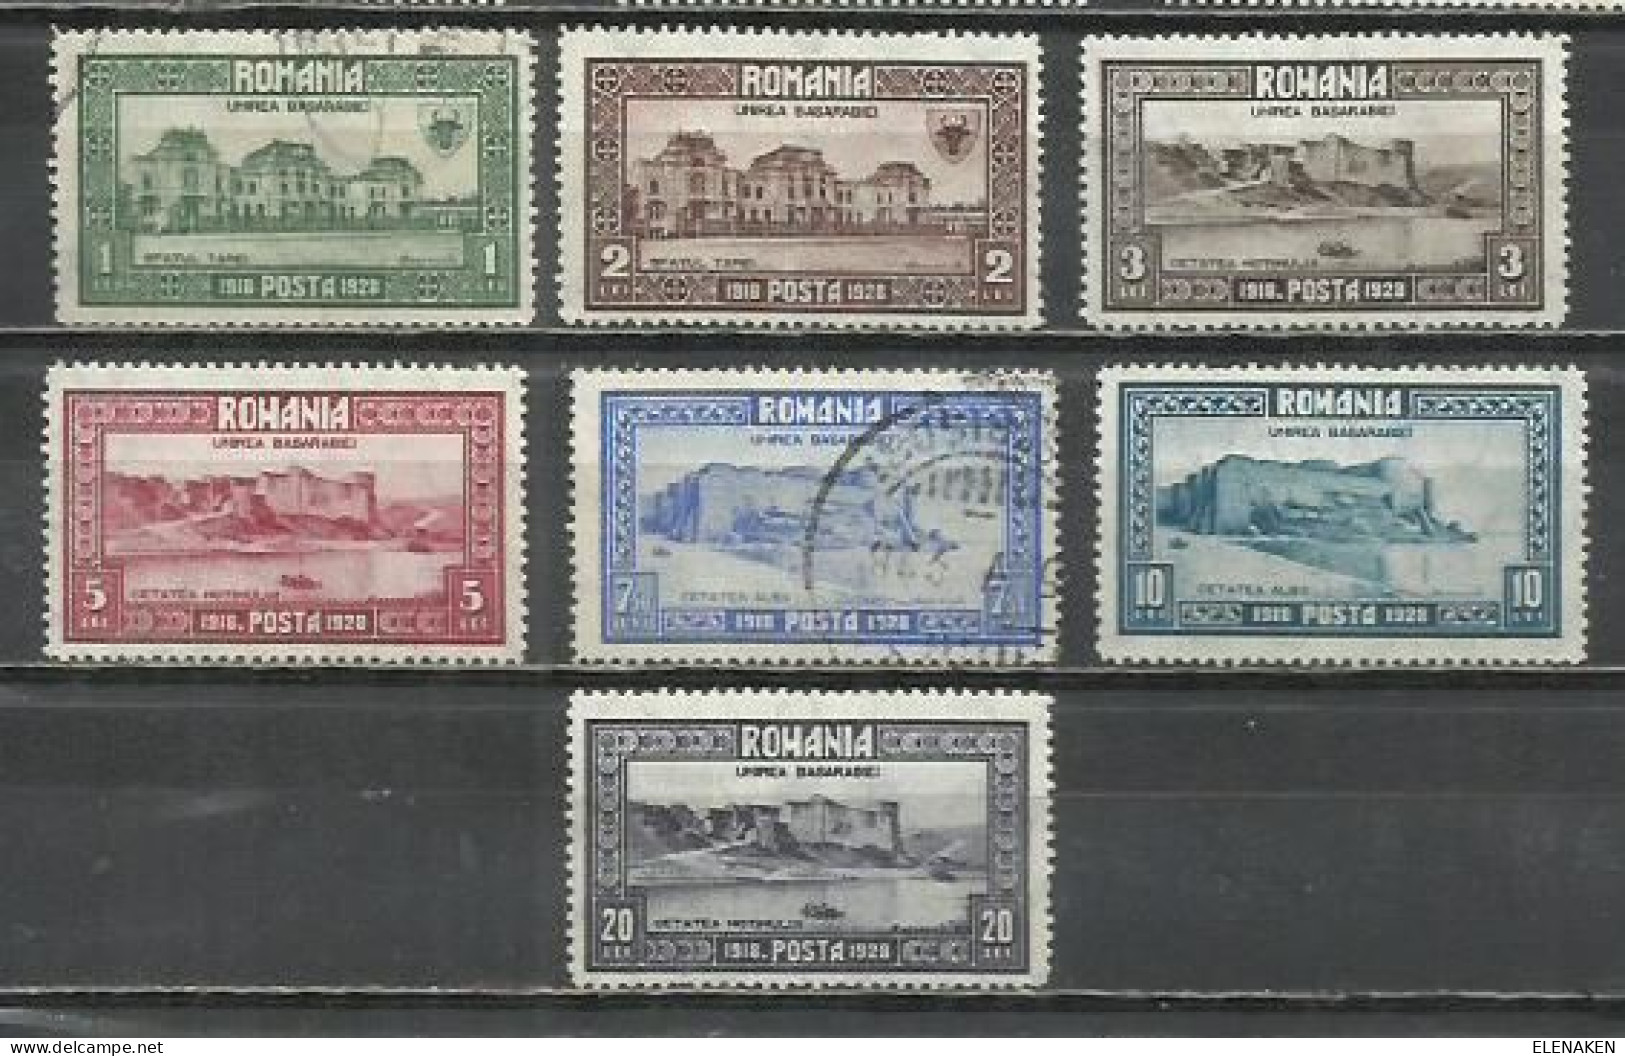 0431A-SERIE COMPLETA RUMANIA 1928 Nº 344/350 ANTIGUOS SELLOS - Used Stamps